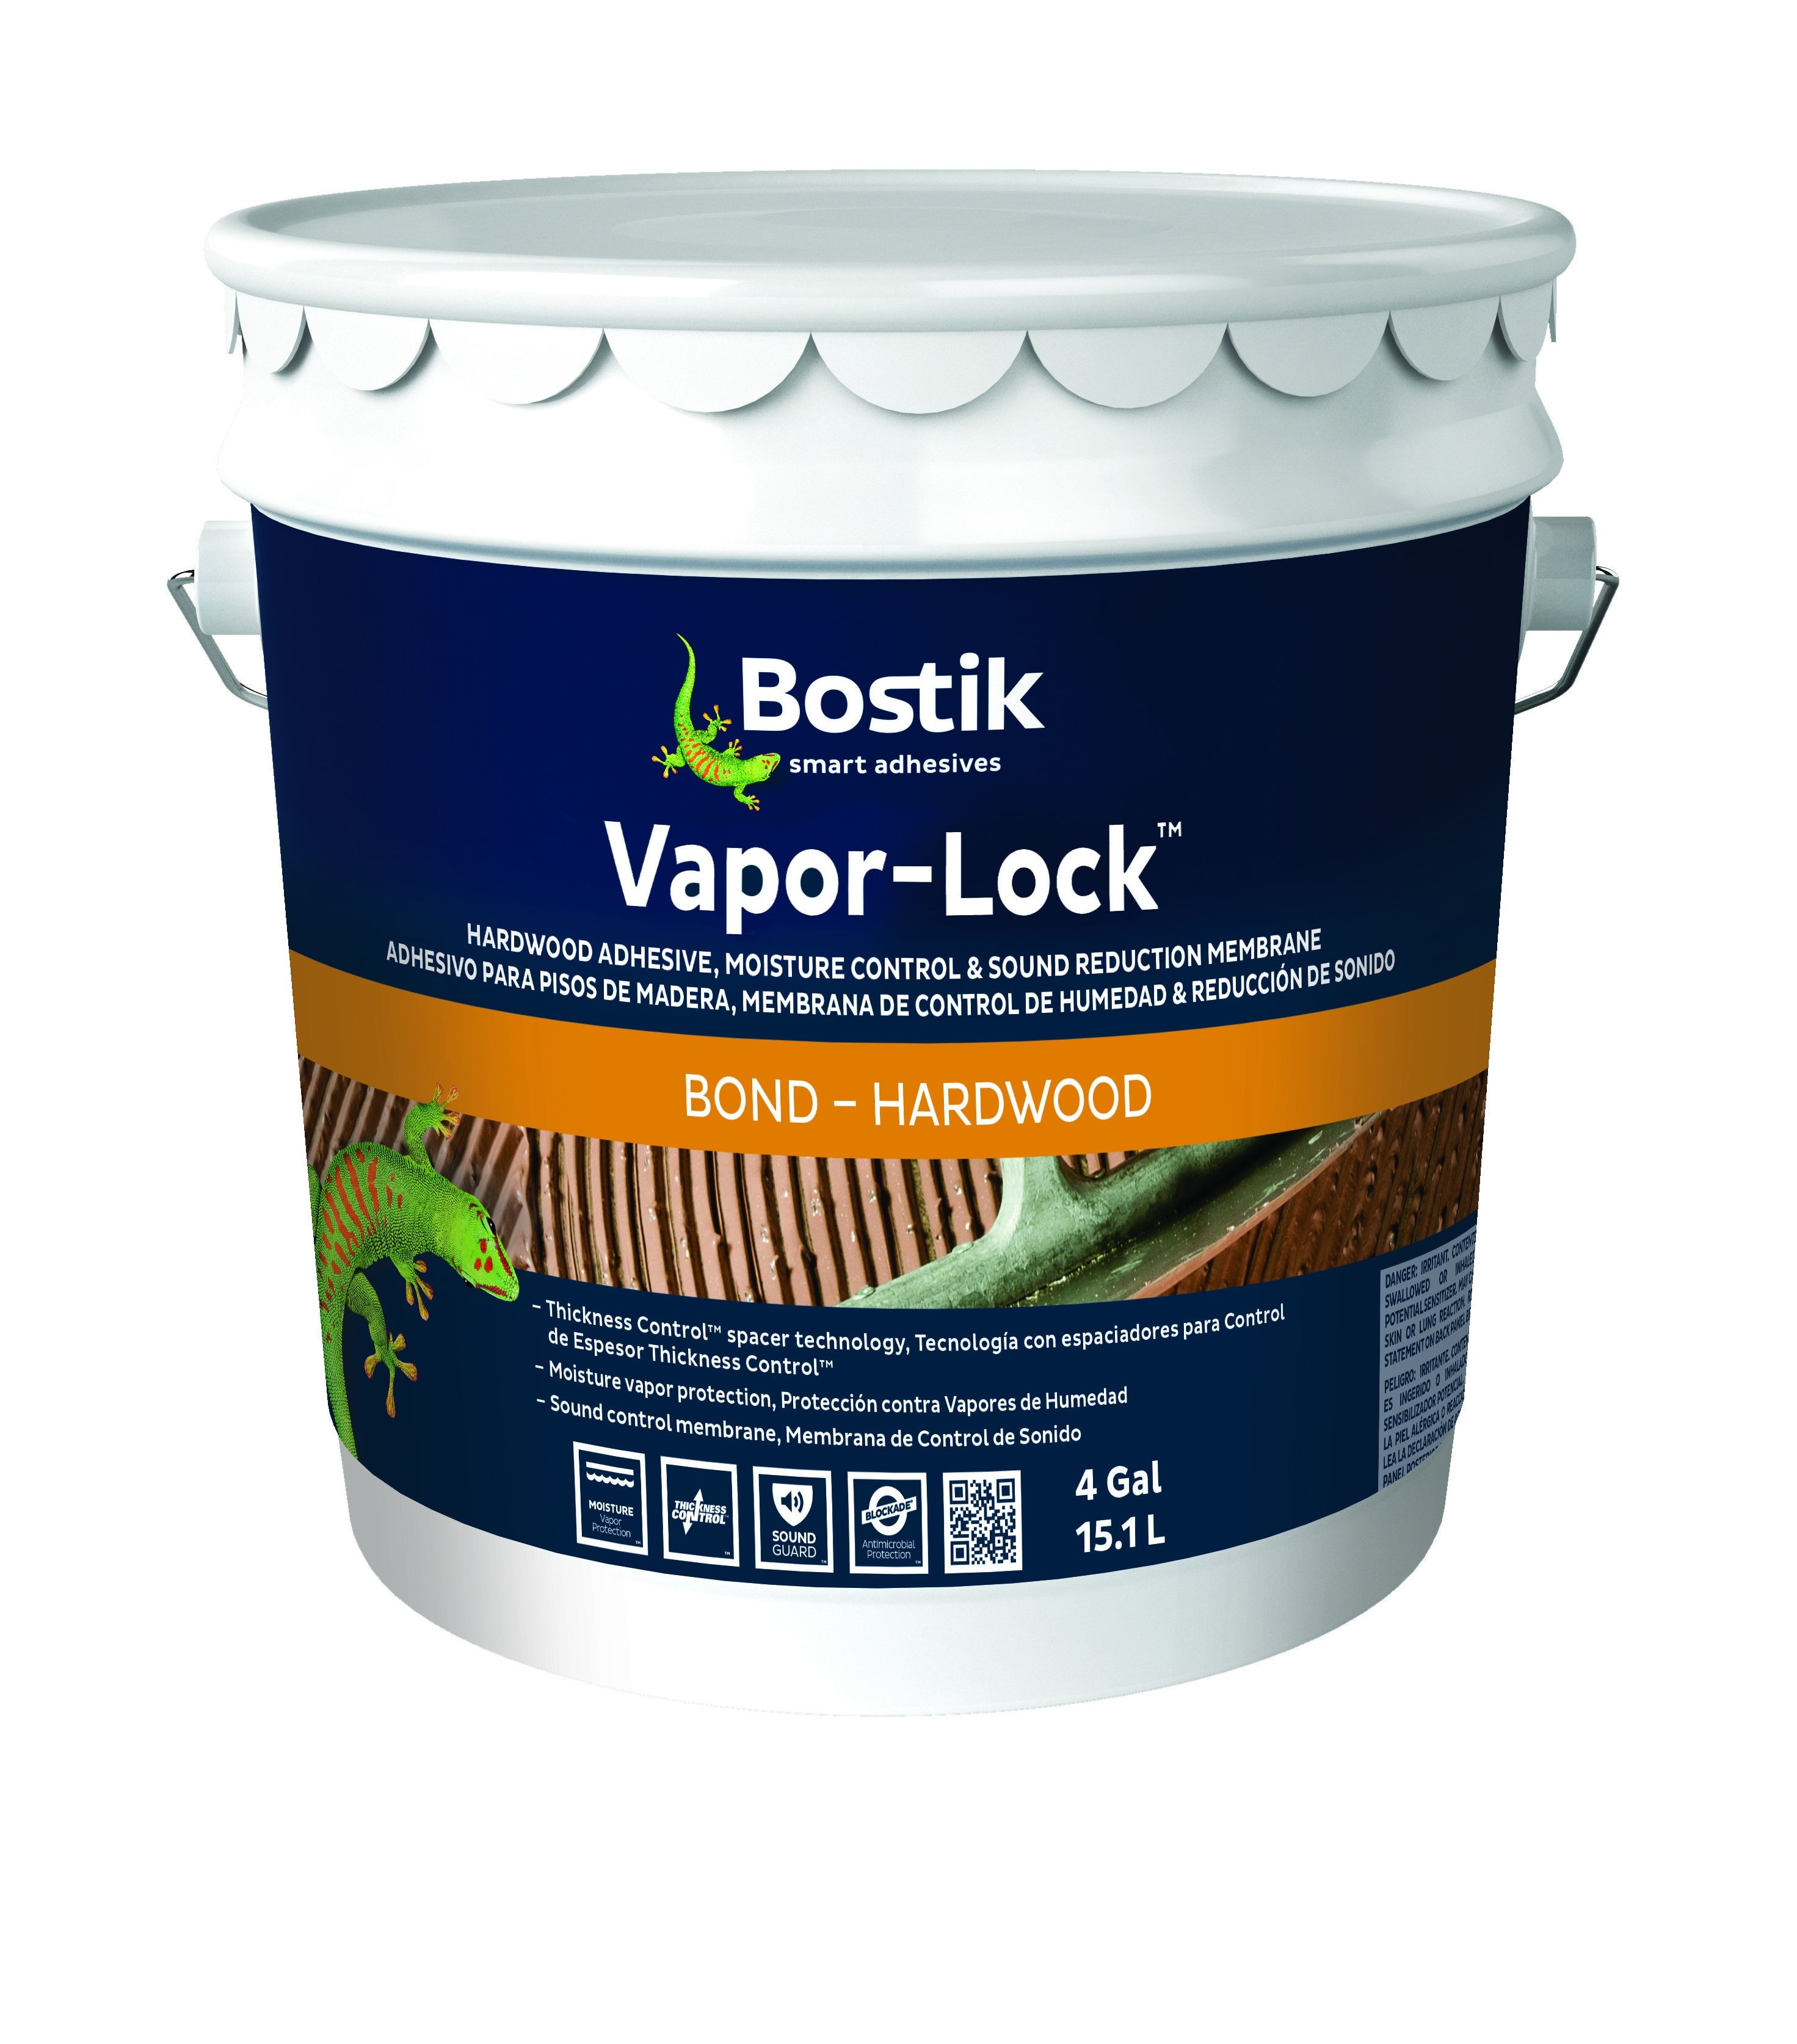 22 Nice Hardwood Floor Refinishing Dallas 2024 free download hardwood floor refinishing dallas of bostik vapor lock wood floor adhesive http dreamhomesbyrob com in bostik vapor lock wood floor adhesive wood flooring can be an excellent addition to you